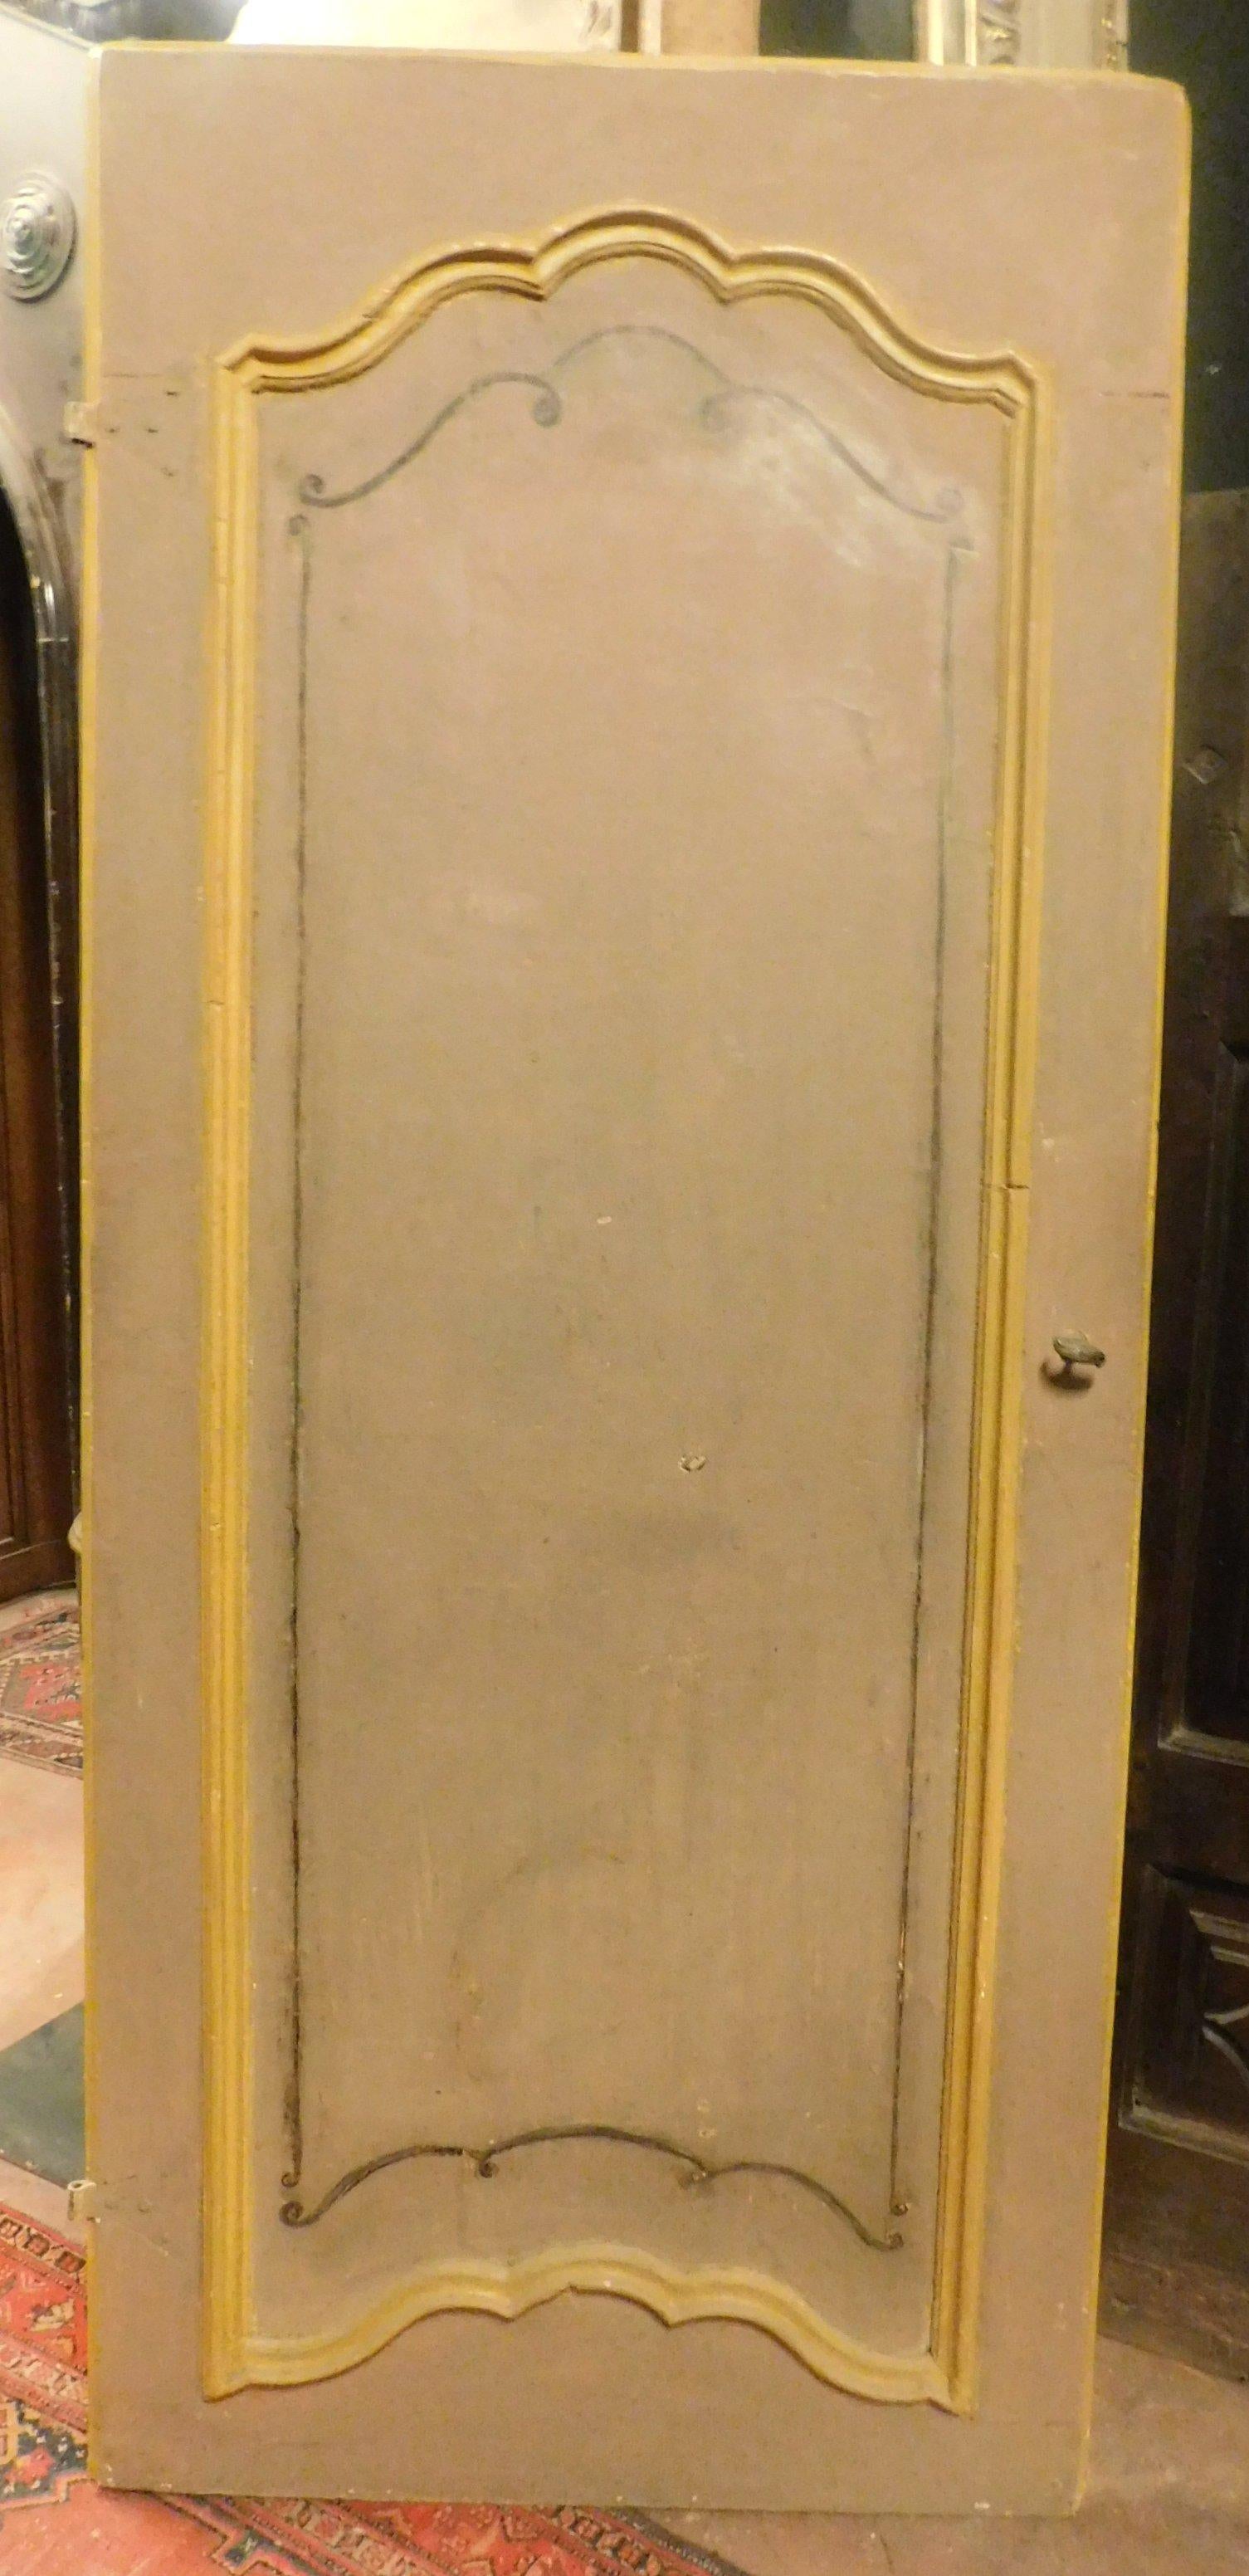 Italian Antique Wooden Door Lacquered and Painted Orange, 1700, Italy For Sale